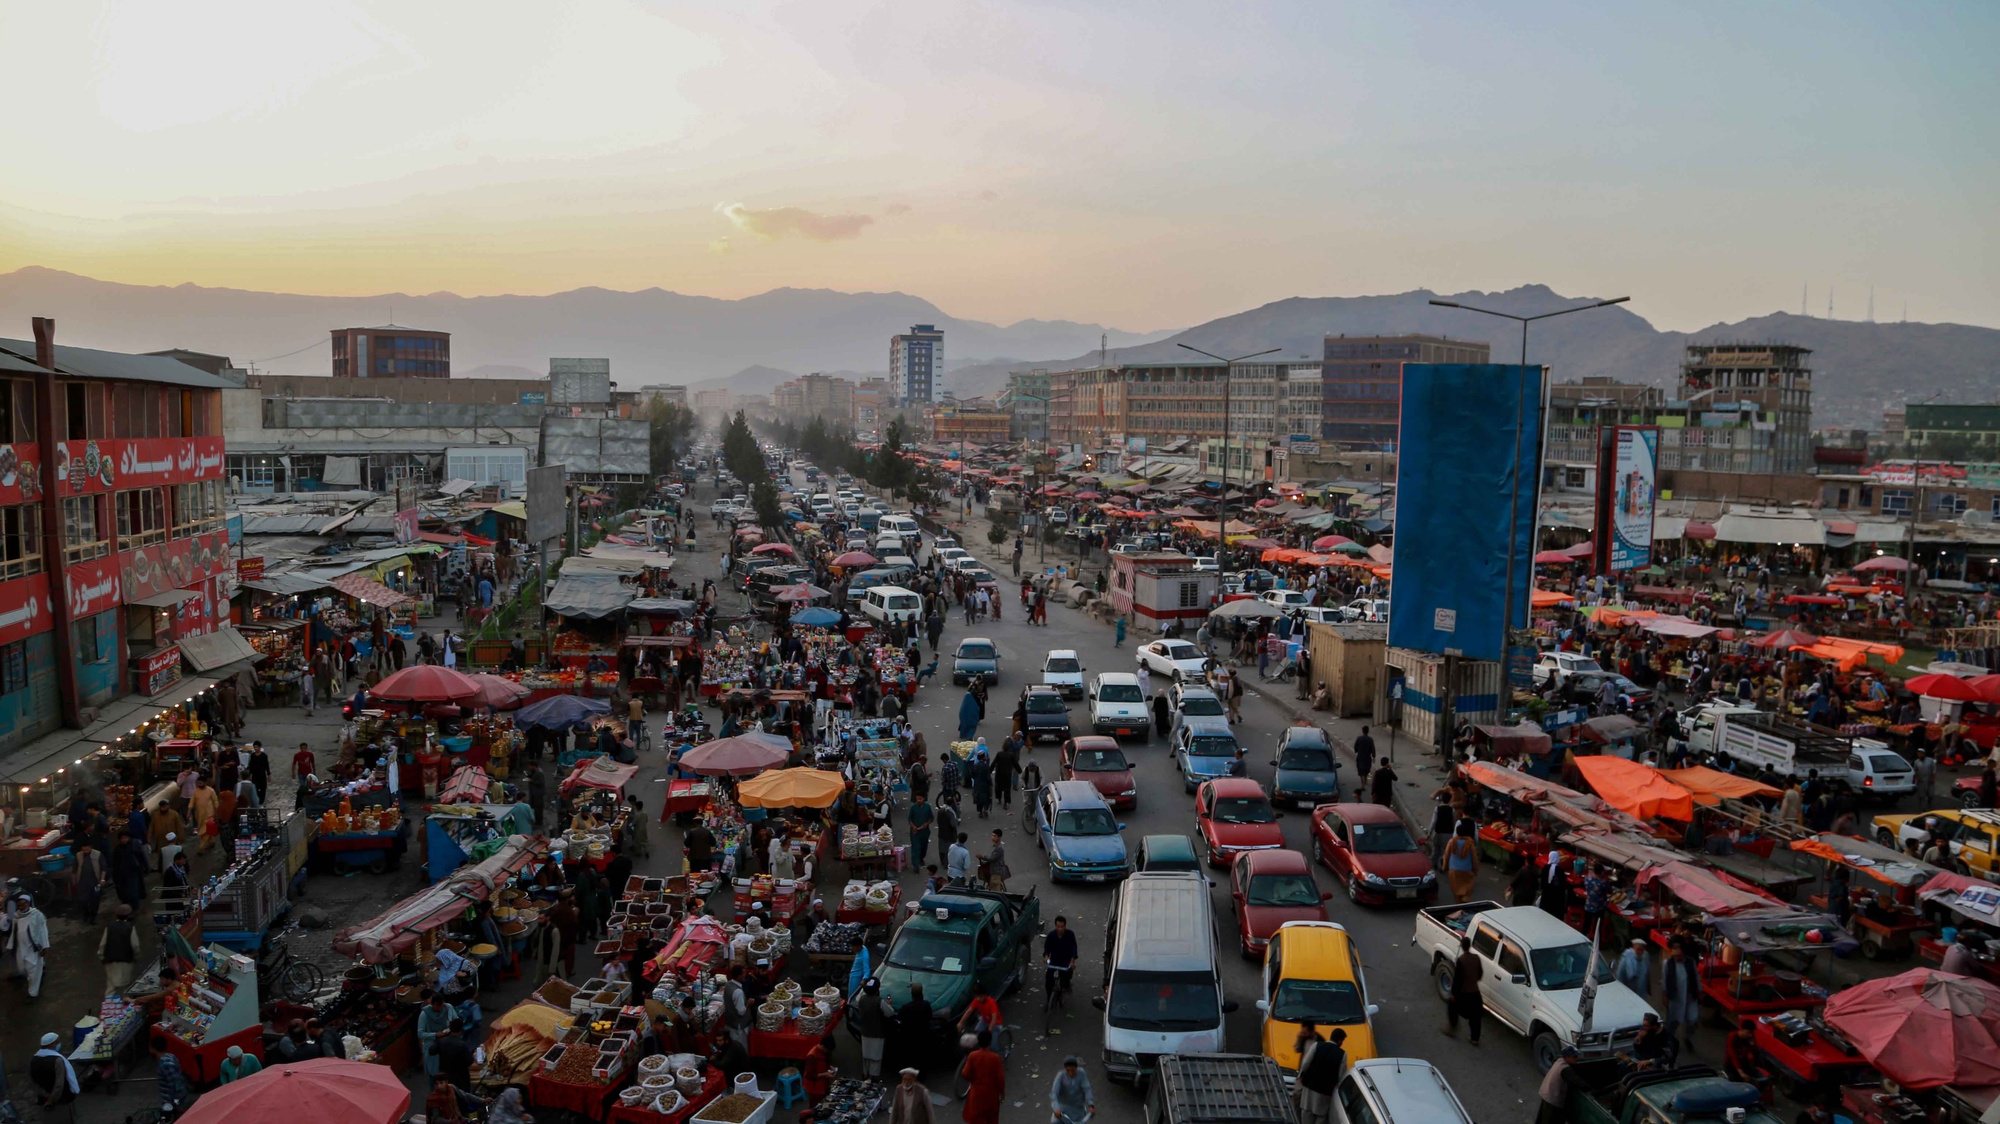 epa09492682 A view of a traffic jam in Kabul, Afghanistan, 28 September 2021. Lack of international recognition remains a pressing problem for the Taliban, who are not only geopolitically isolated but are also facing a major cash crunch after international financing institutions froze most of the funds Afghanistan has long relied upon for economic stability.  EPA/STRINGER